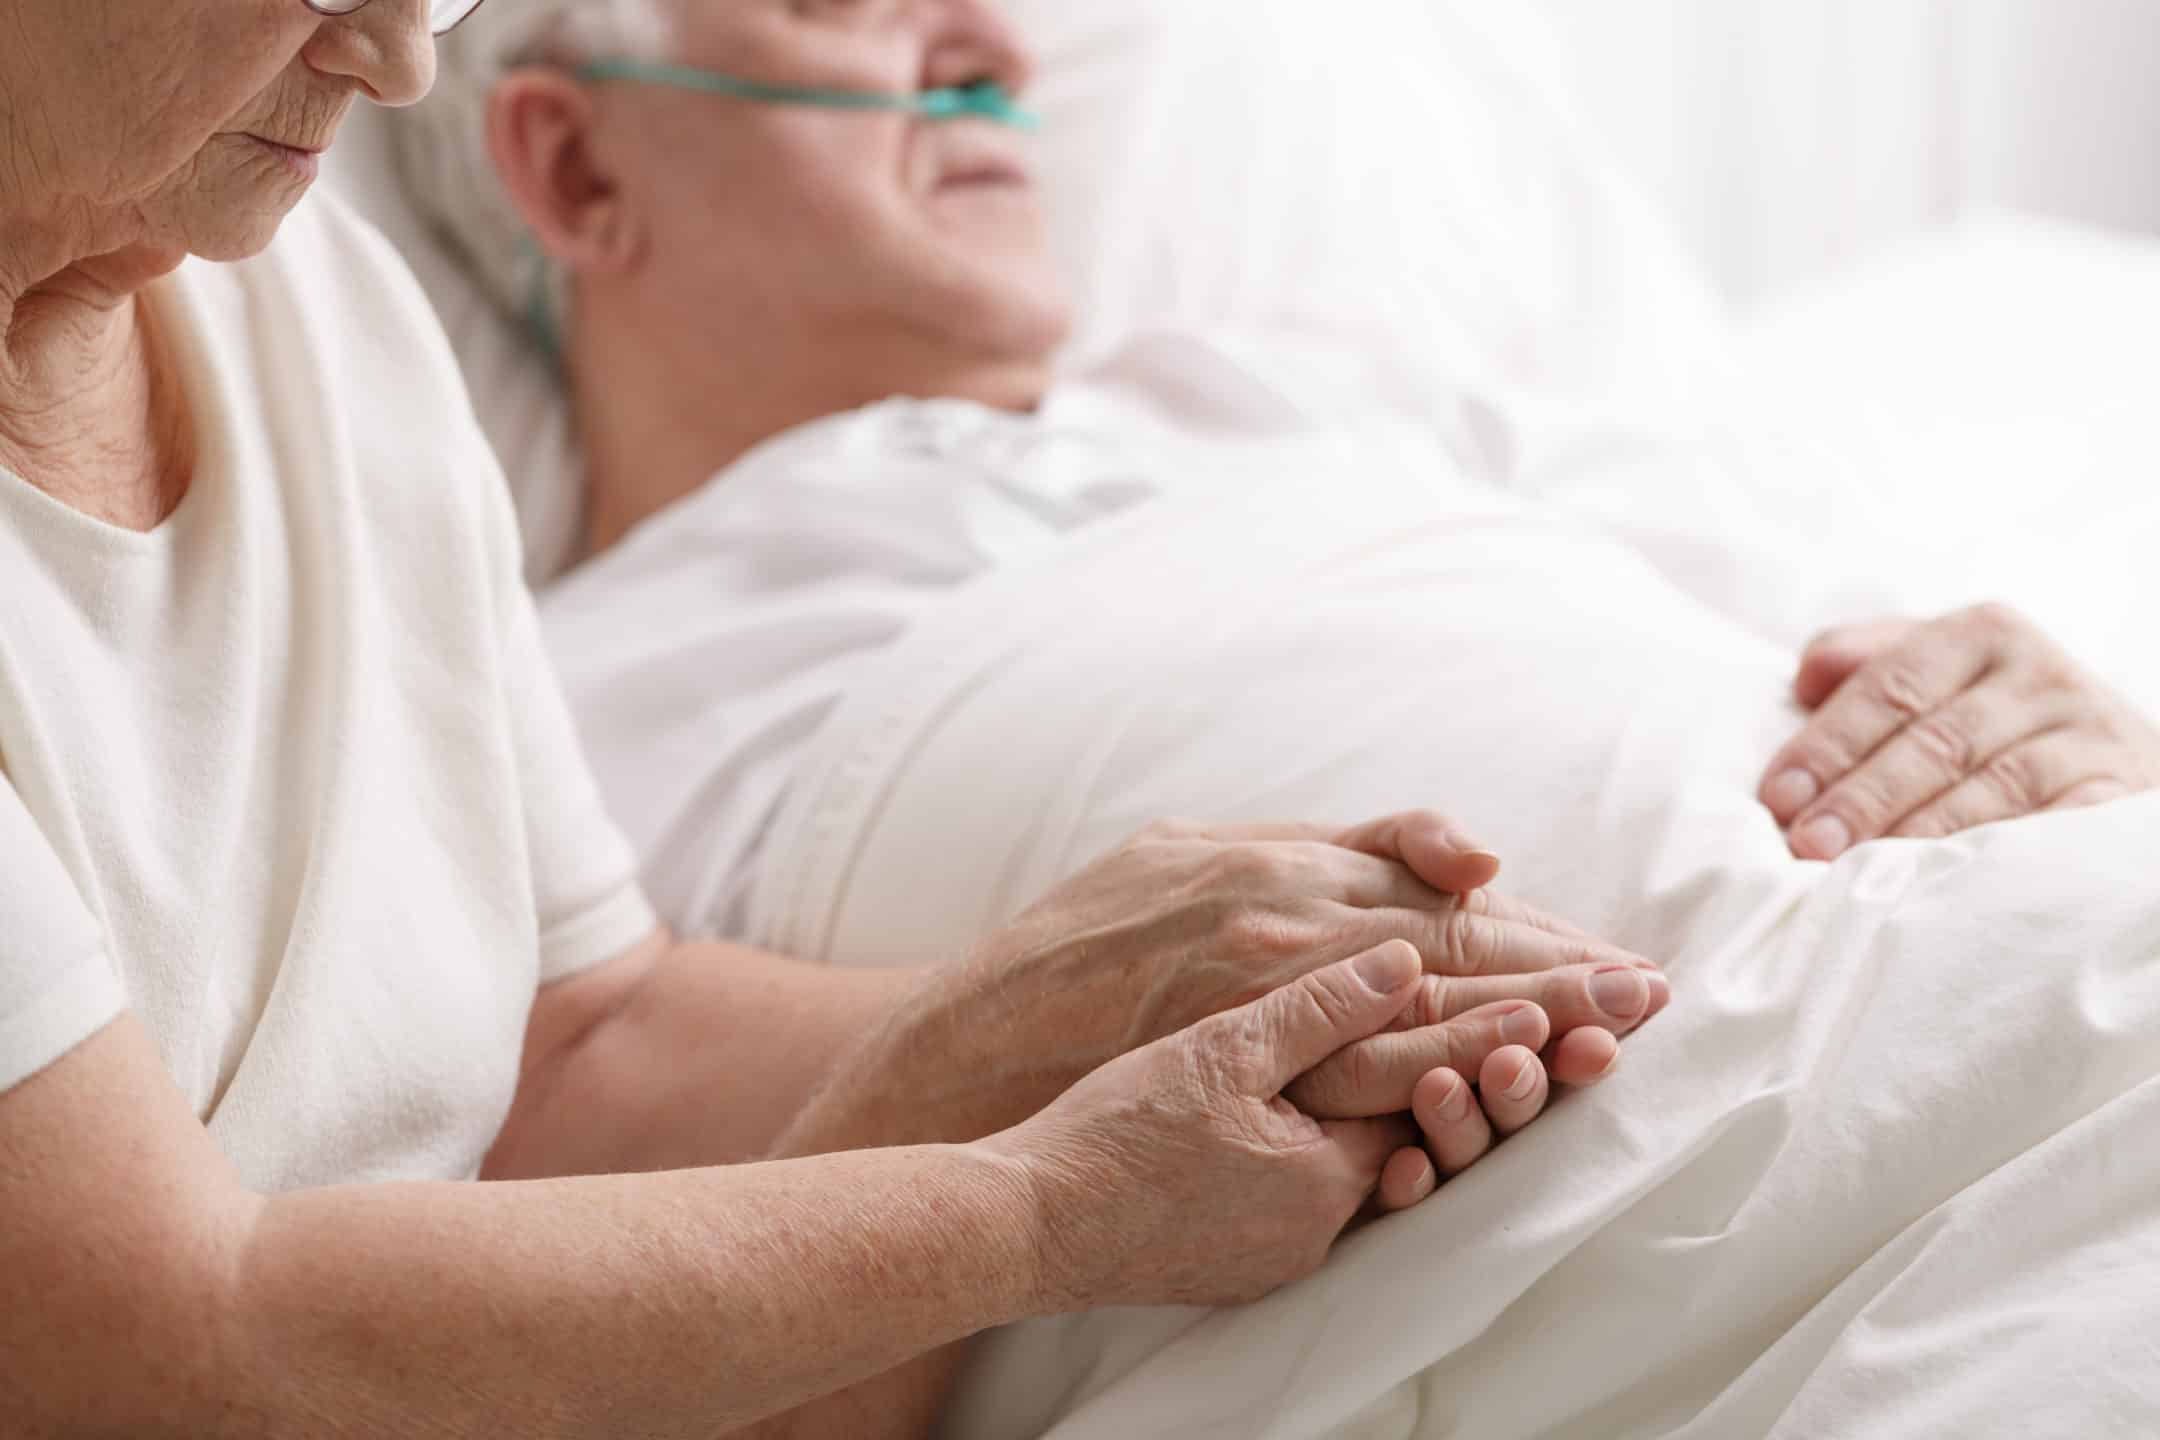 woman holding a senior's hand in the hospital